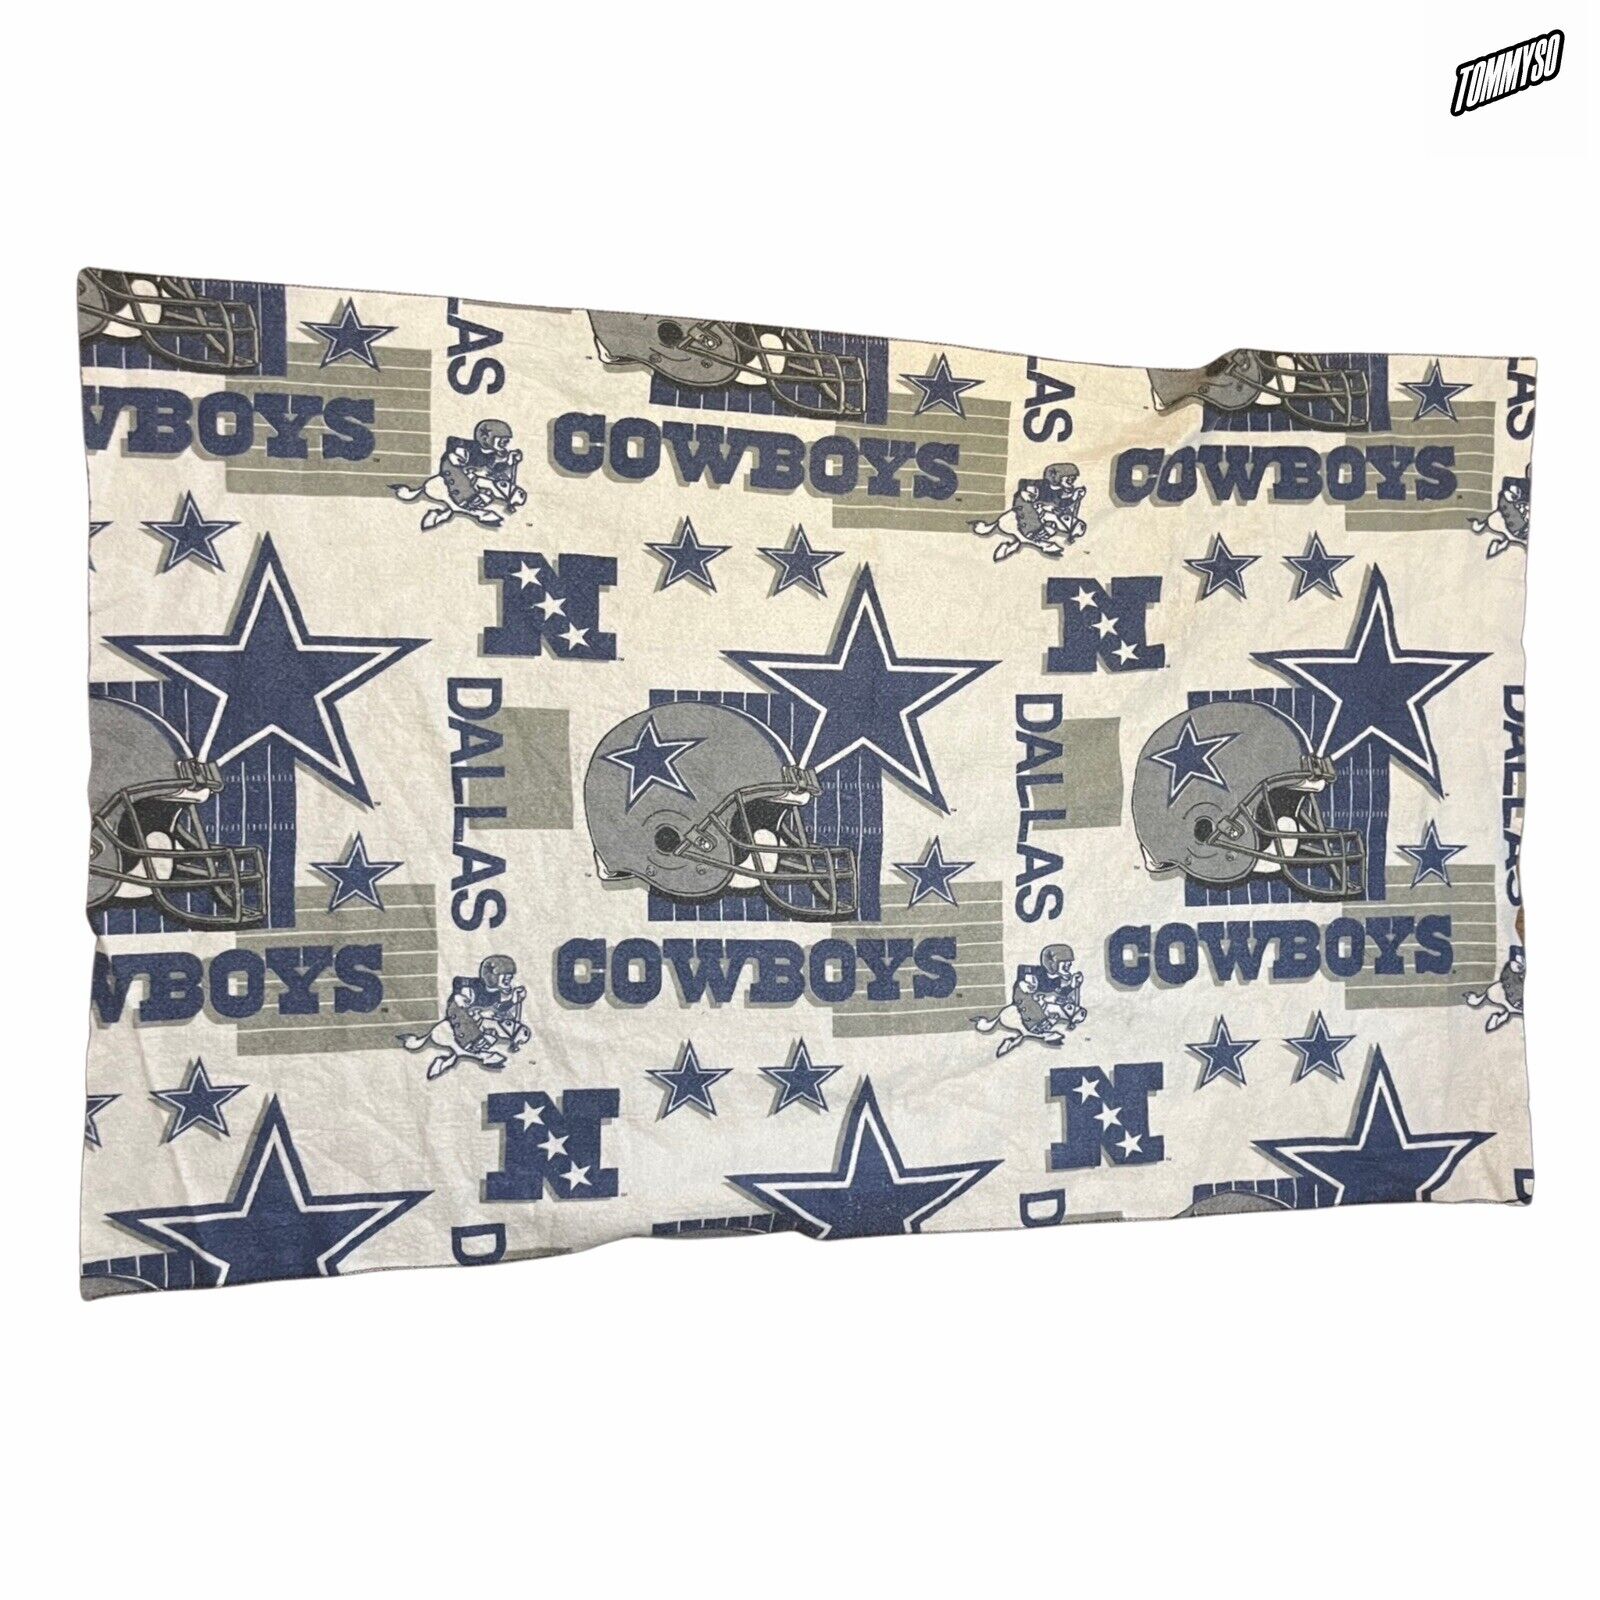 Vintage 1990s Dallas Cowboys Stitched Blanket 60 X 45 inches